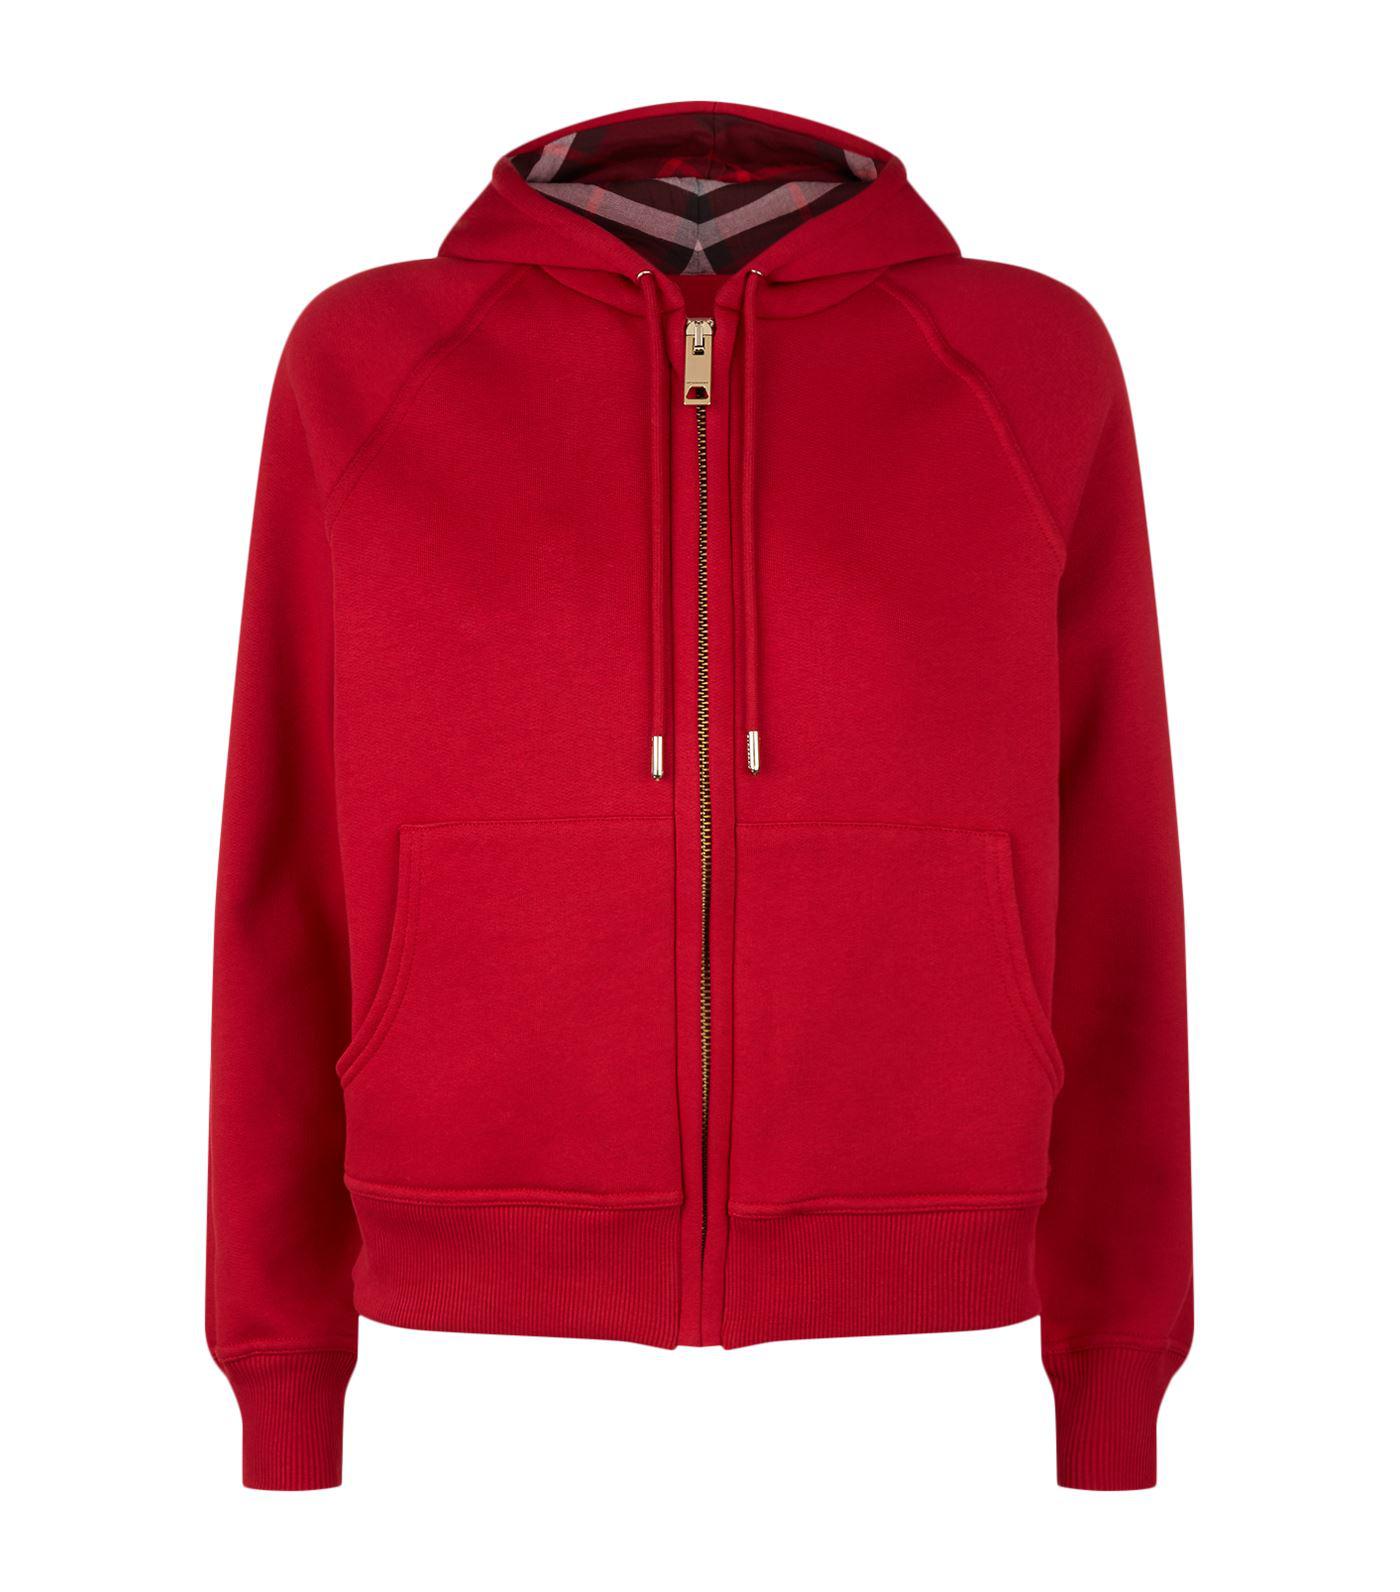 Burberry Cotton Zip-up Hoodie in Red - Lyst